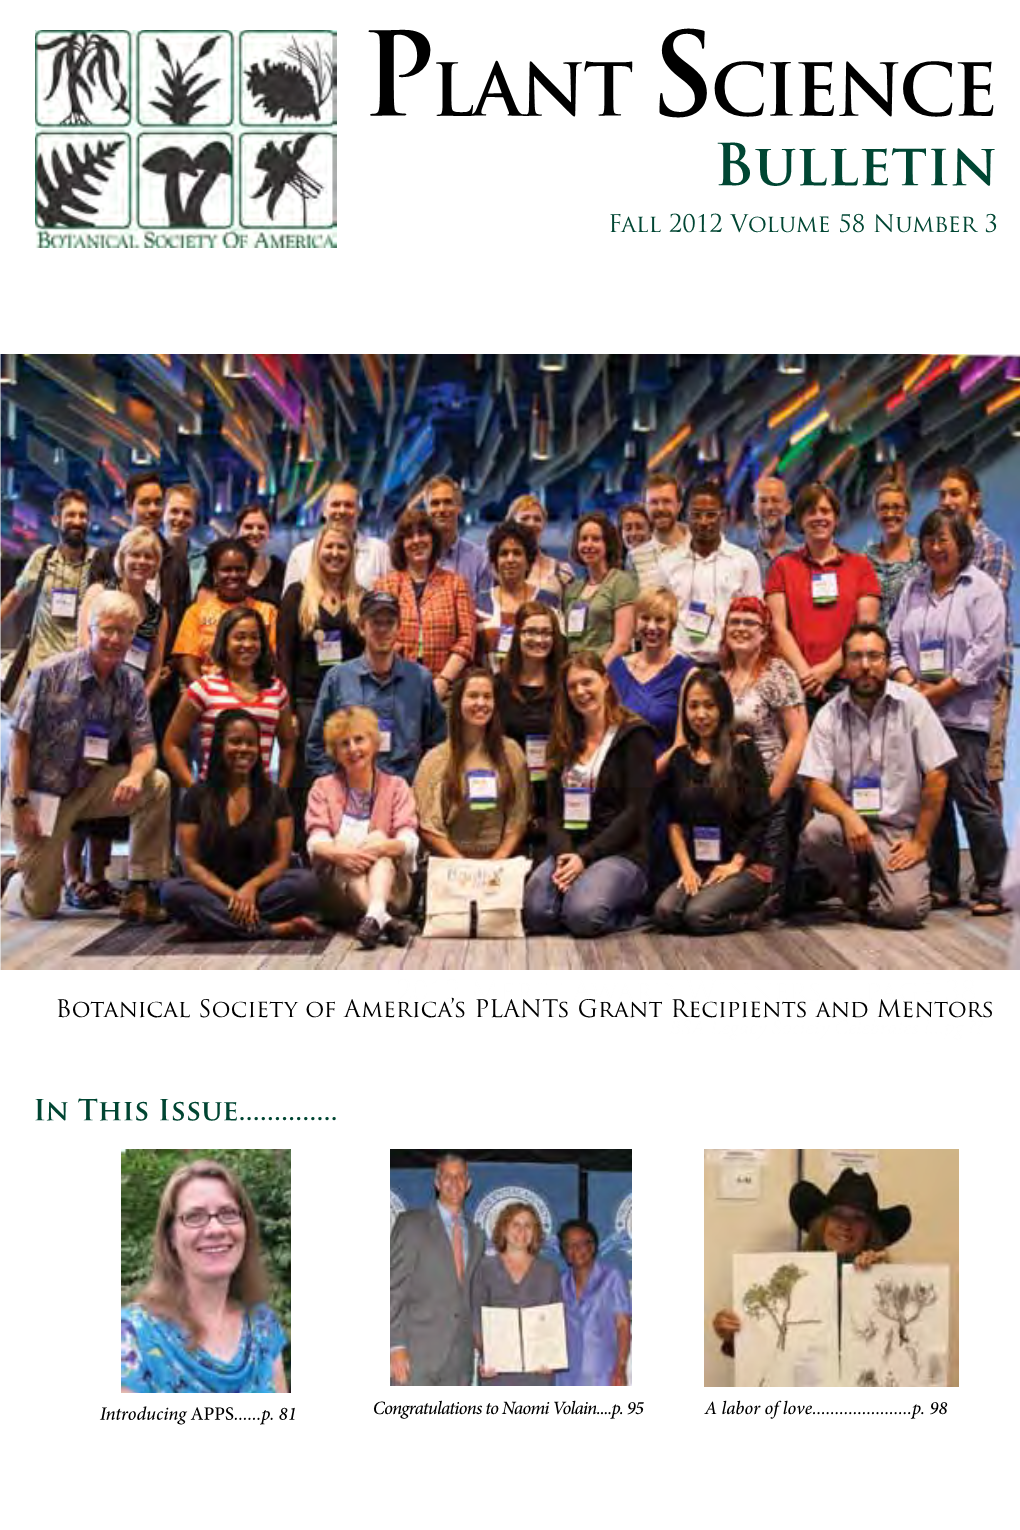 PLANT SCIENCE Bulletin Fall 2012 Volume 58 Number 3